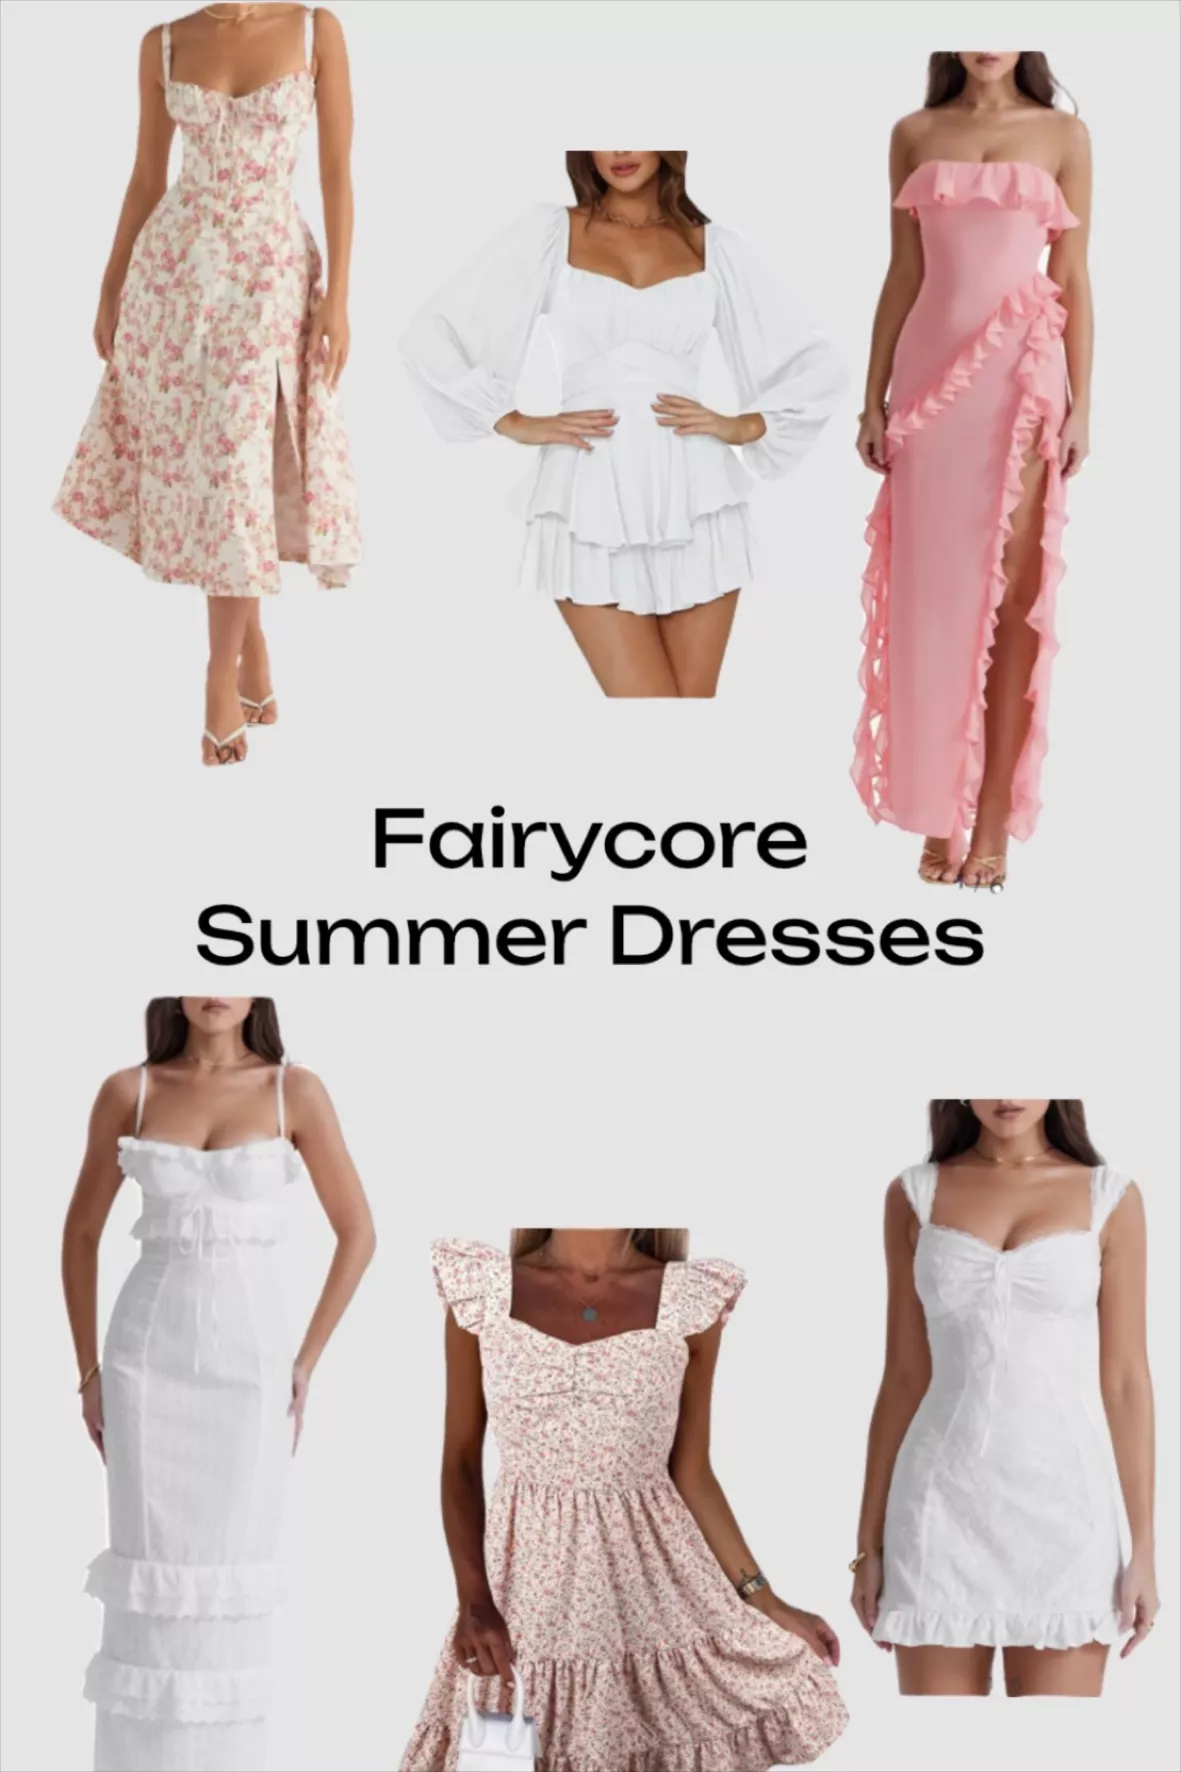 What Is Fairycore? What To Know About This Pinterest Trend